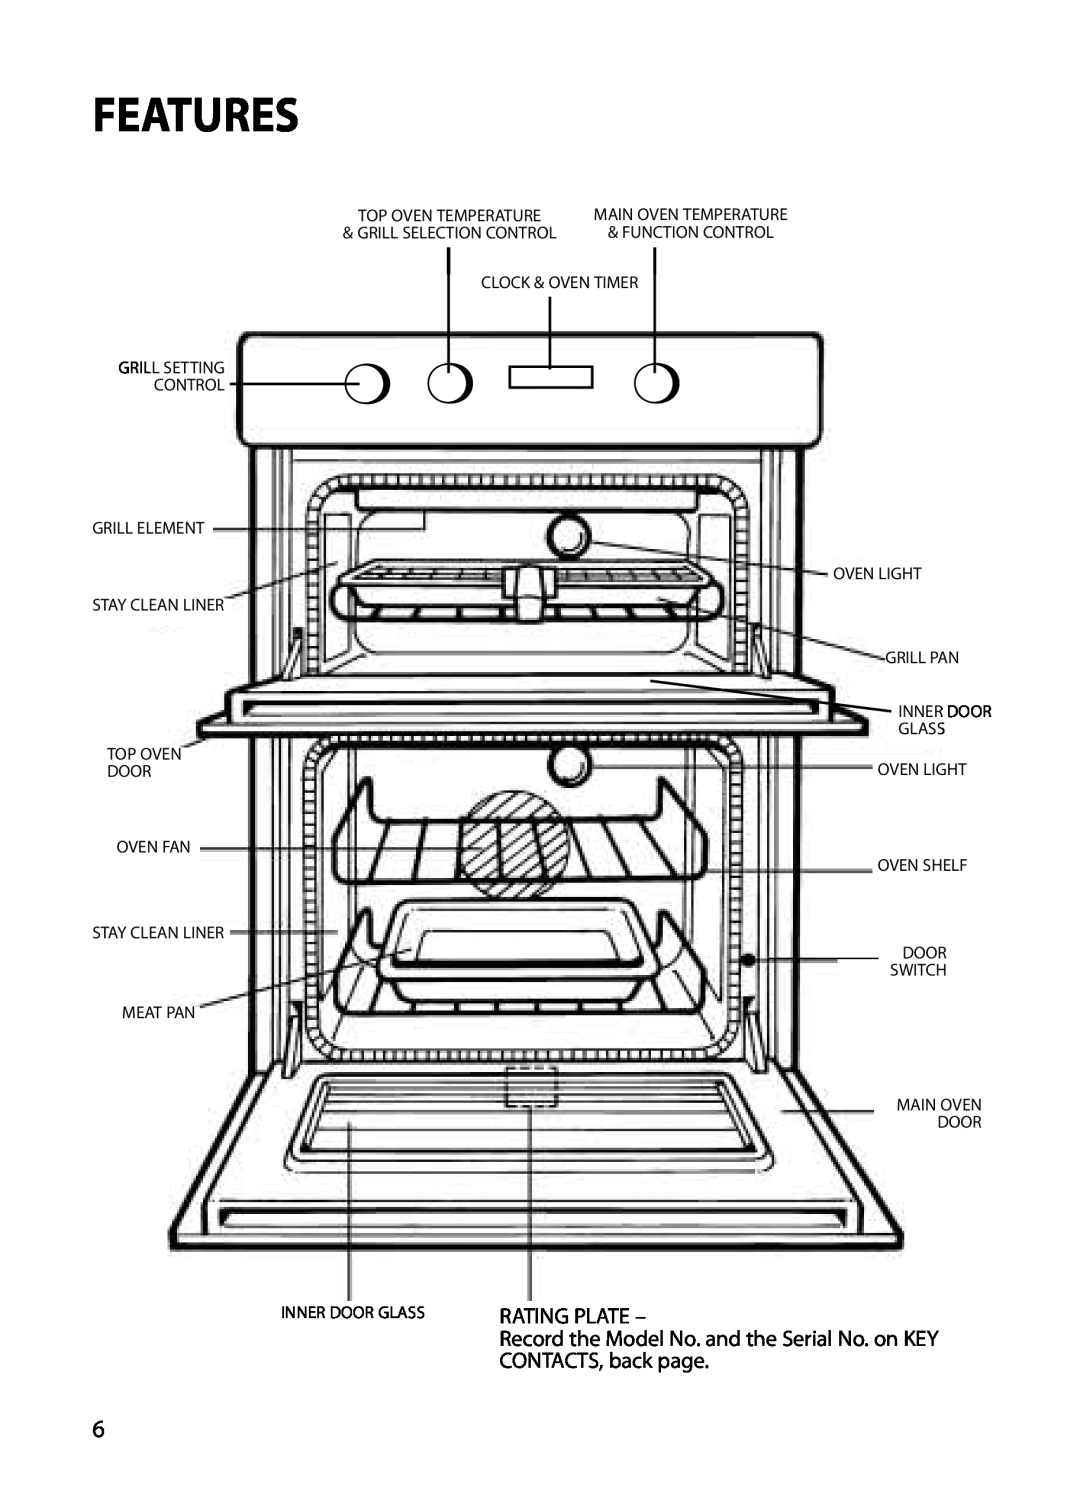 Hotpoint BU71, BU82, BU72 Features, Grill Setting Control Grill Element Stay Clean Liner Top Oven Door, Clock & Oven Timer 